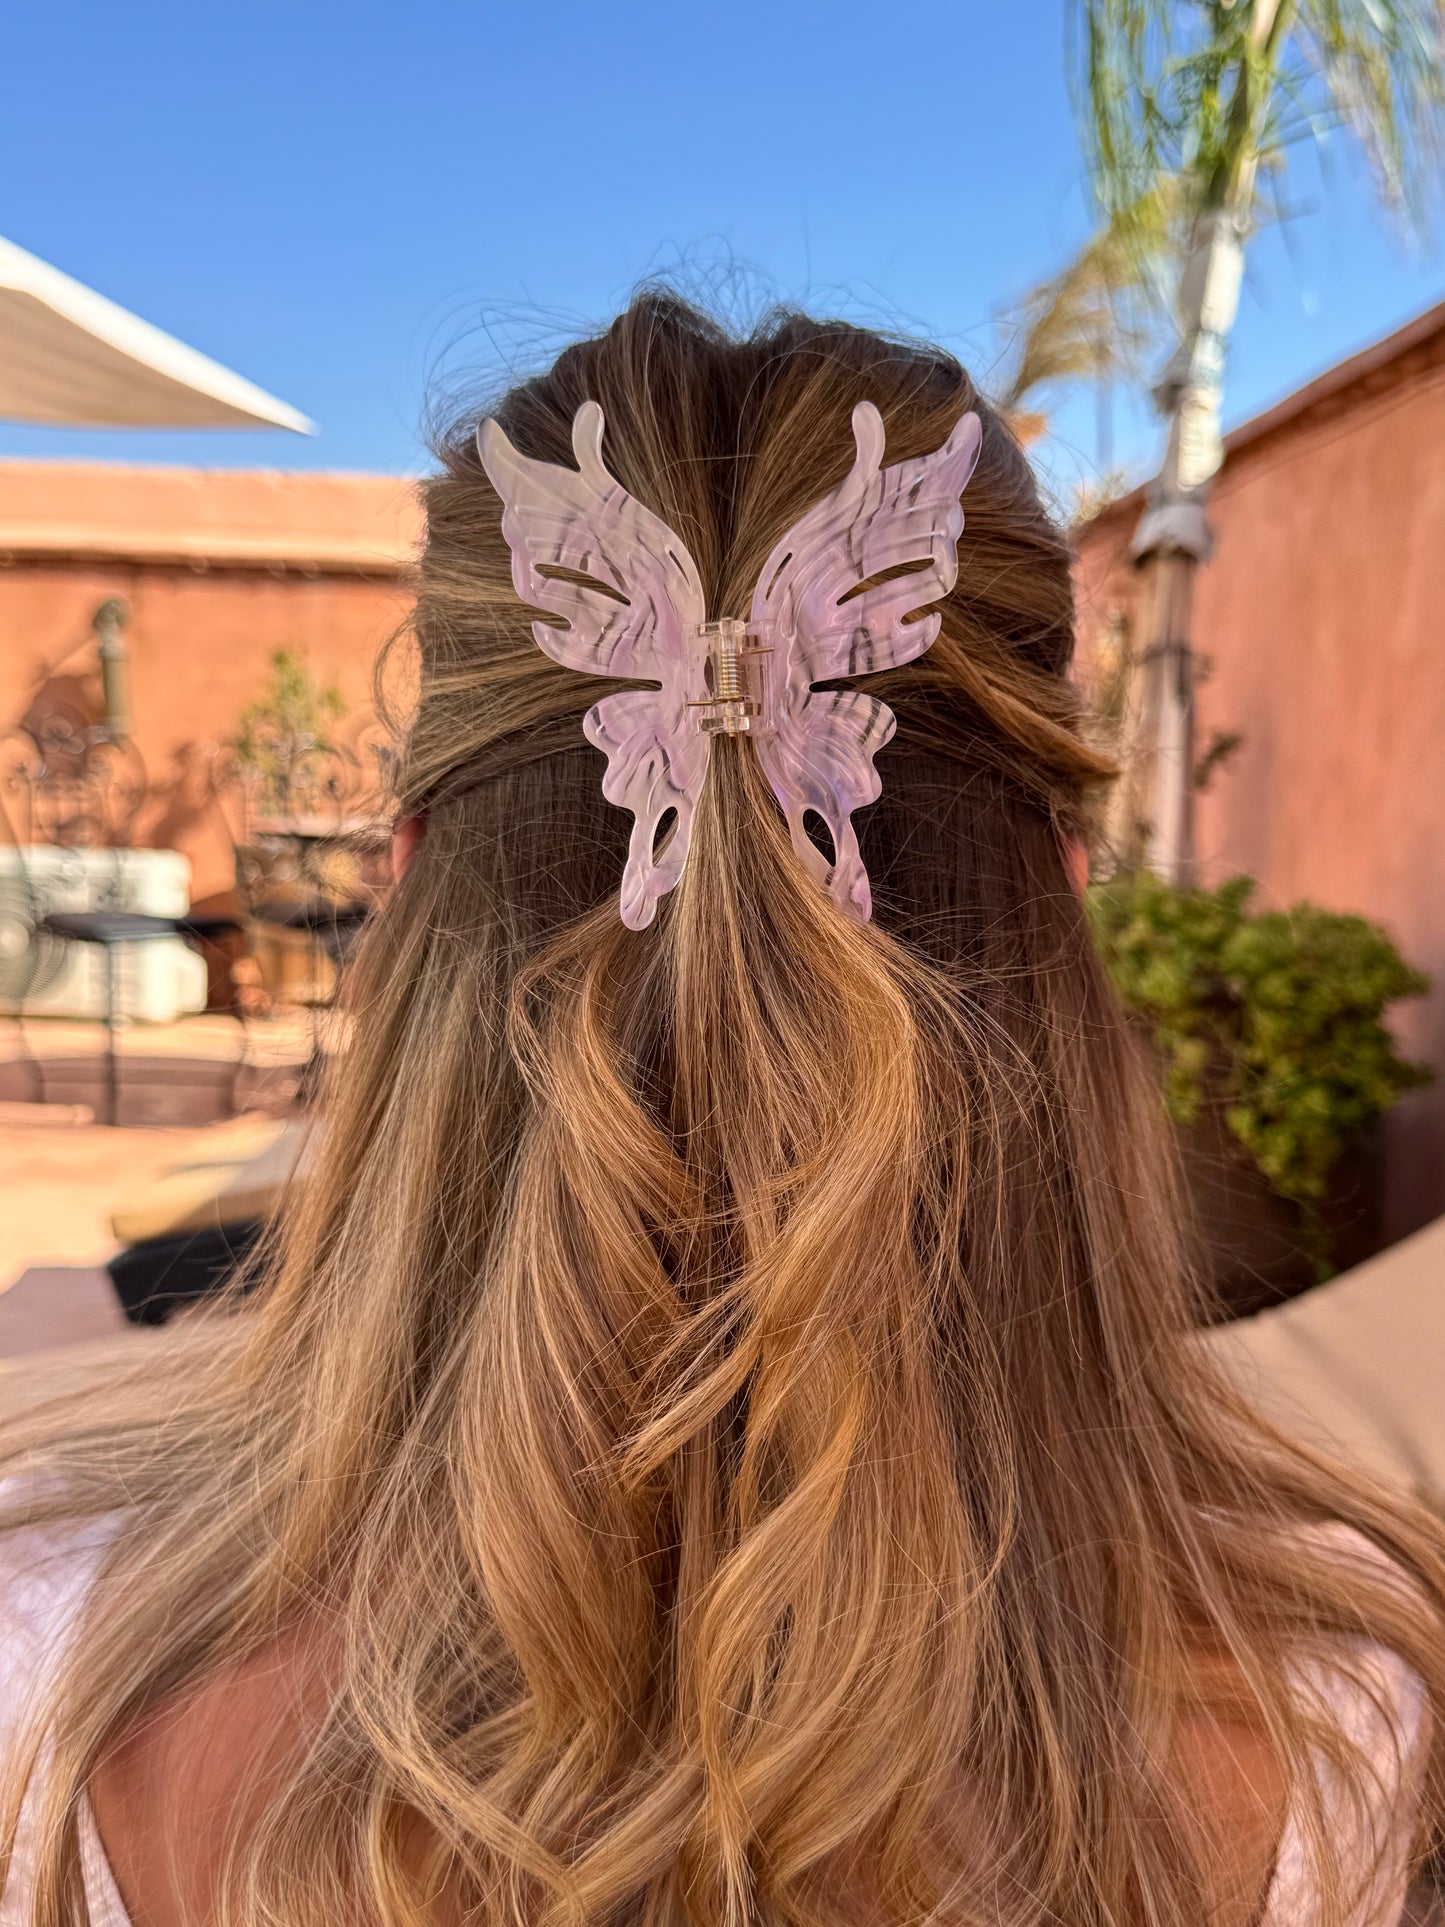 Linda Lavender Butterfly Hair Claw